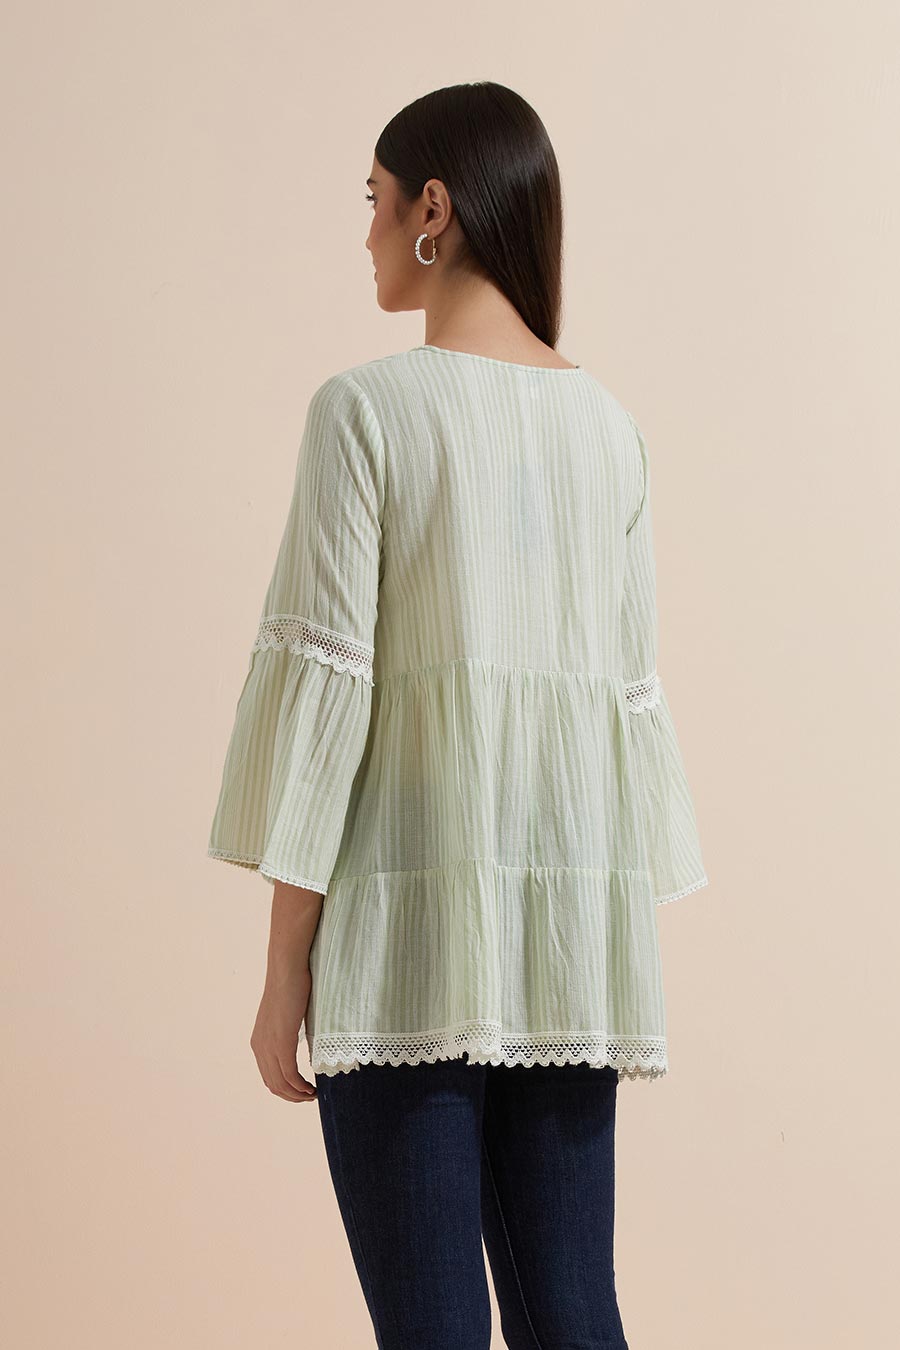 Green Stripe Cotton Embroidered Top